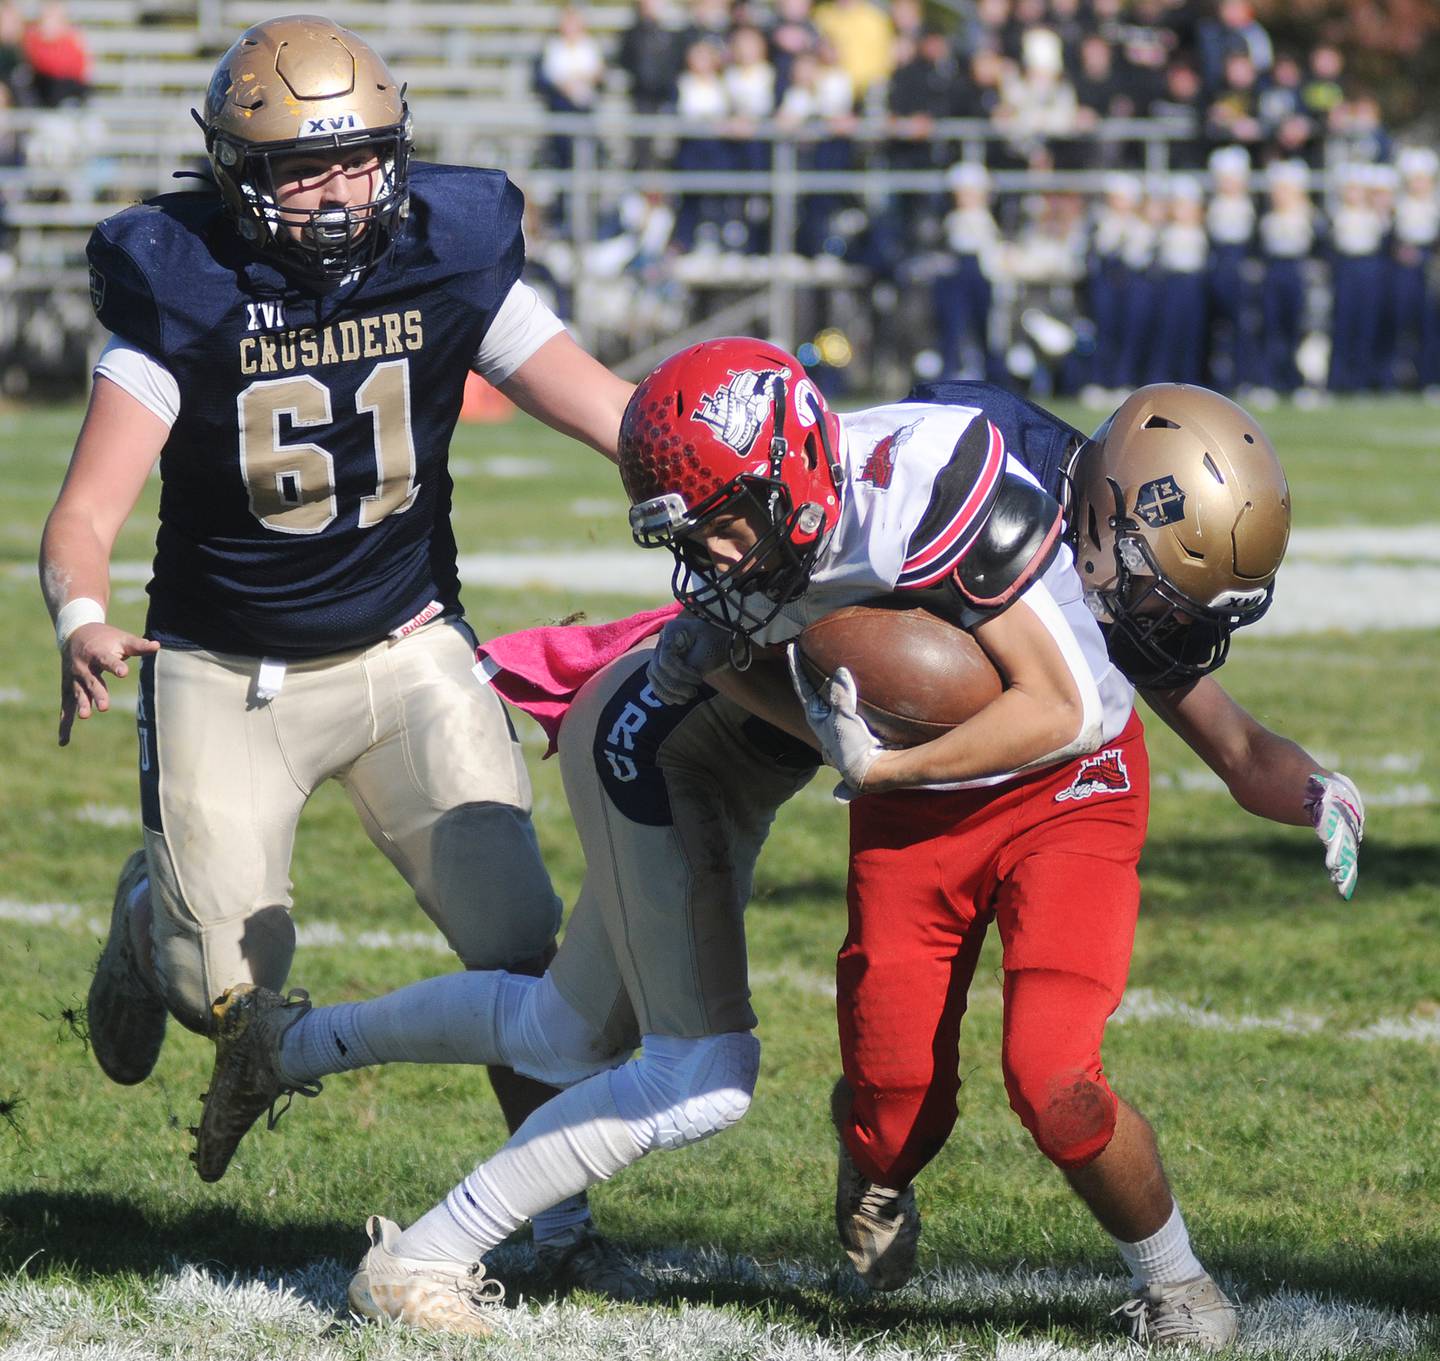 Marquette's Logan Nelson (42) tackles Fulton's Ryan Eads as teammate Beau Ewers closes in during the 1A playoff game at Gould Stadium on Saturday, Nov. 6, 2021.